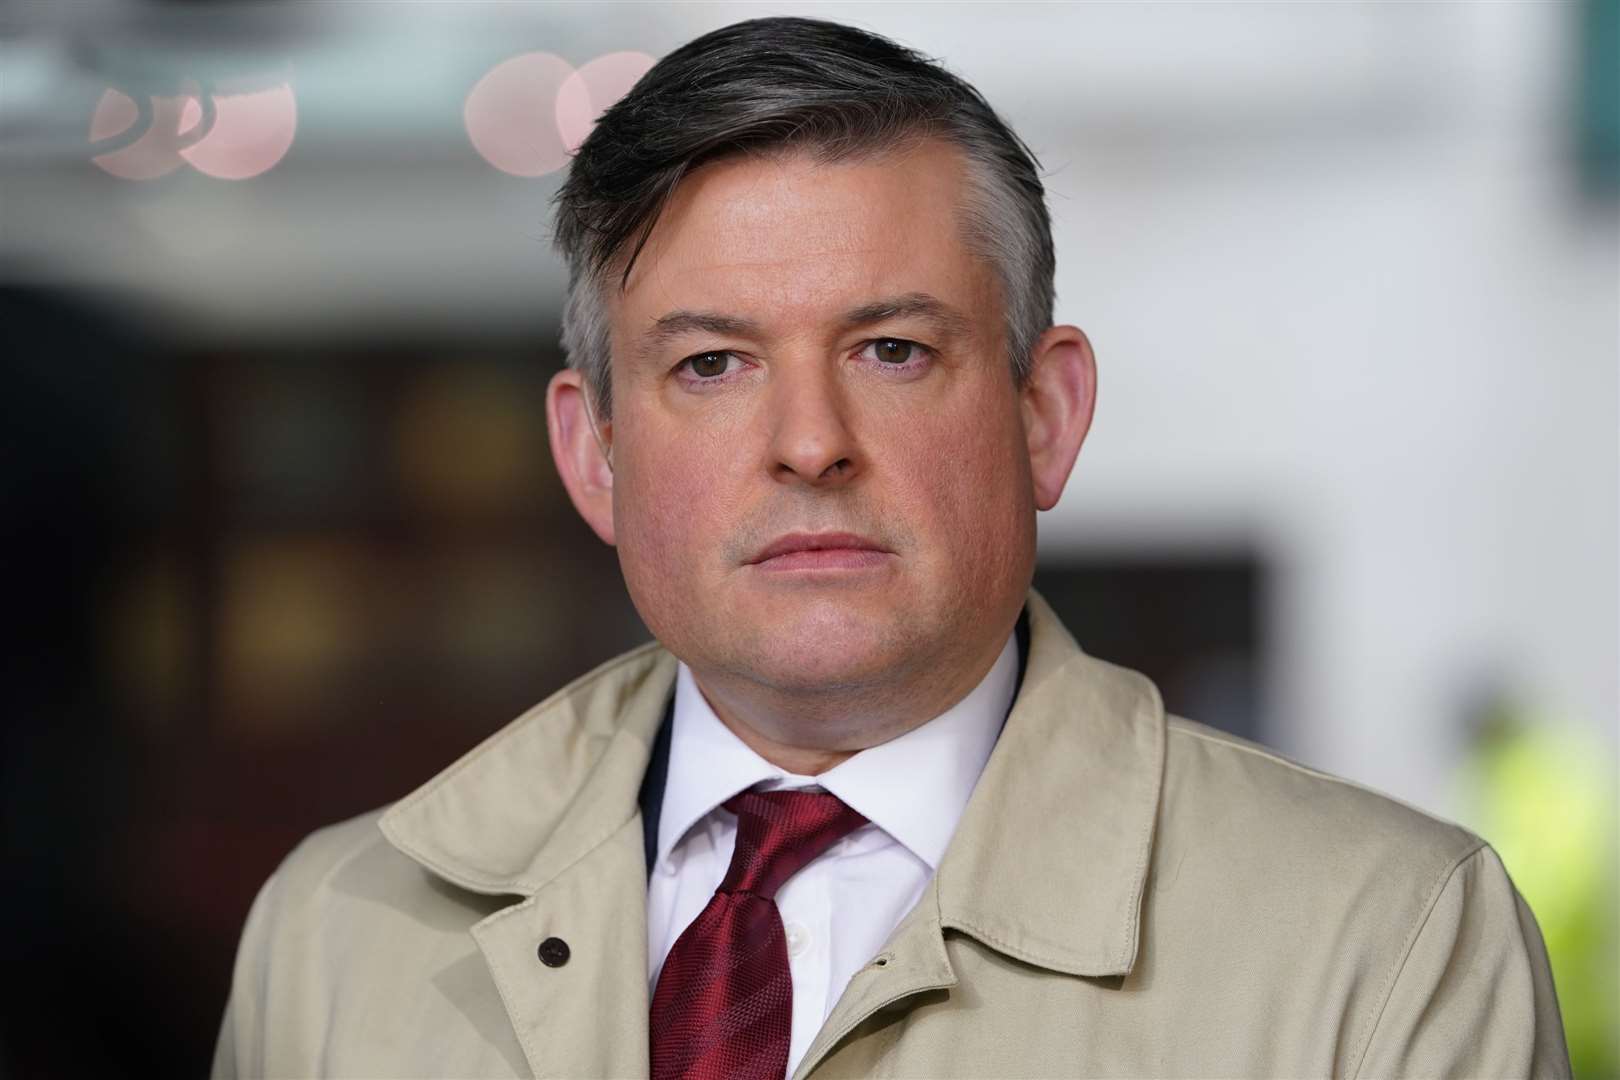 Shadow paymaster general Jonathan Ashworth said he thought people were ‘surprised’ Ms Abbott was not permitted to speak during PMQs (Lucy North/PA)